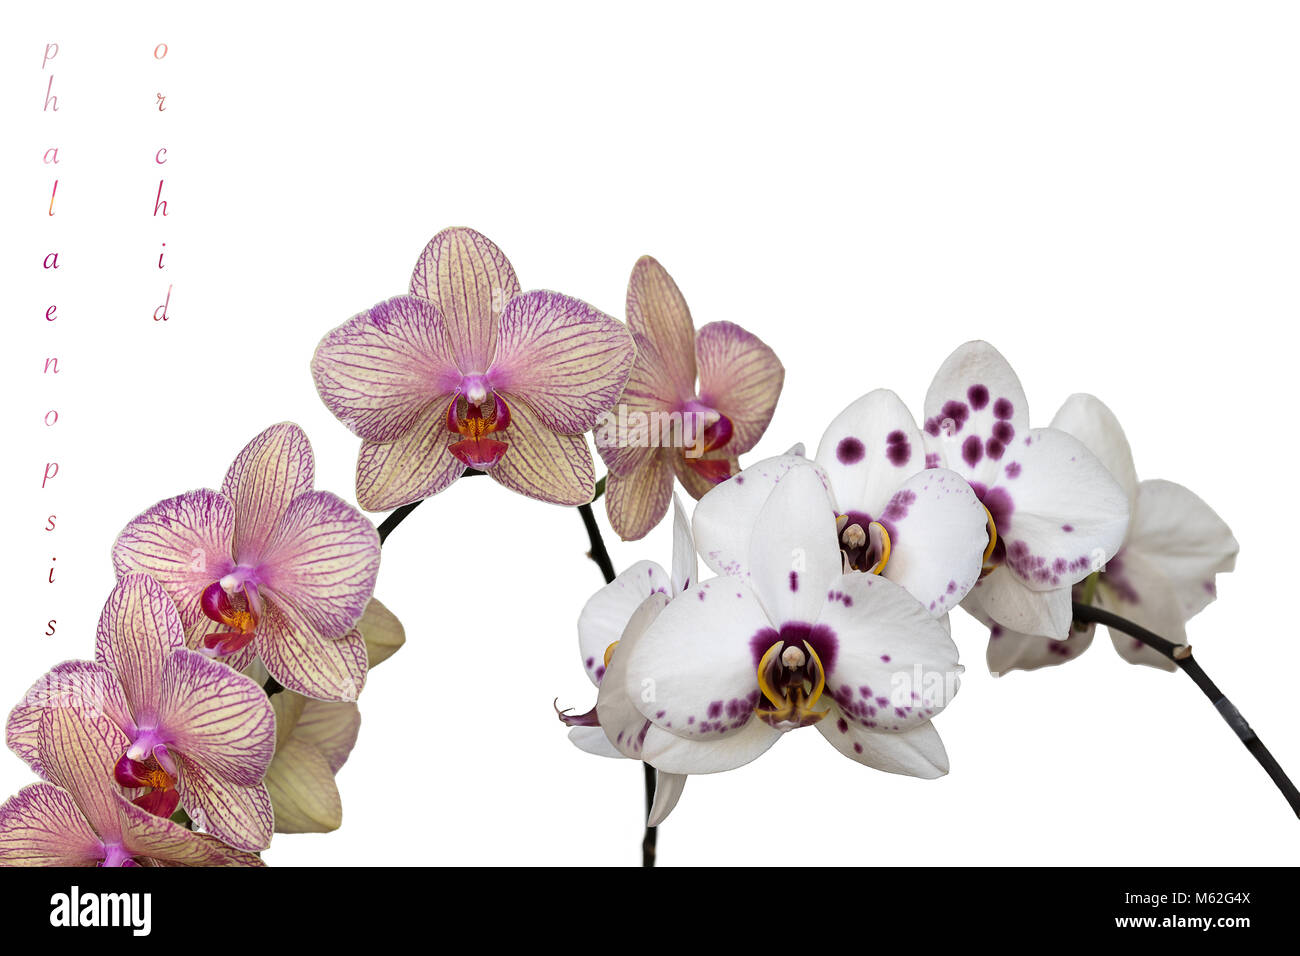 Phalaenopsis Orchid Flowers In Different Colors Isolated On White Stock Photo Alamy